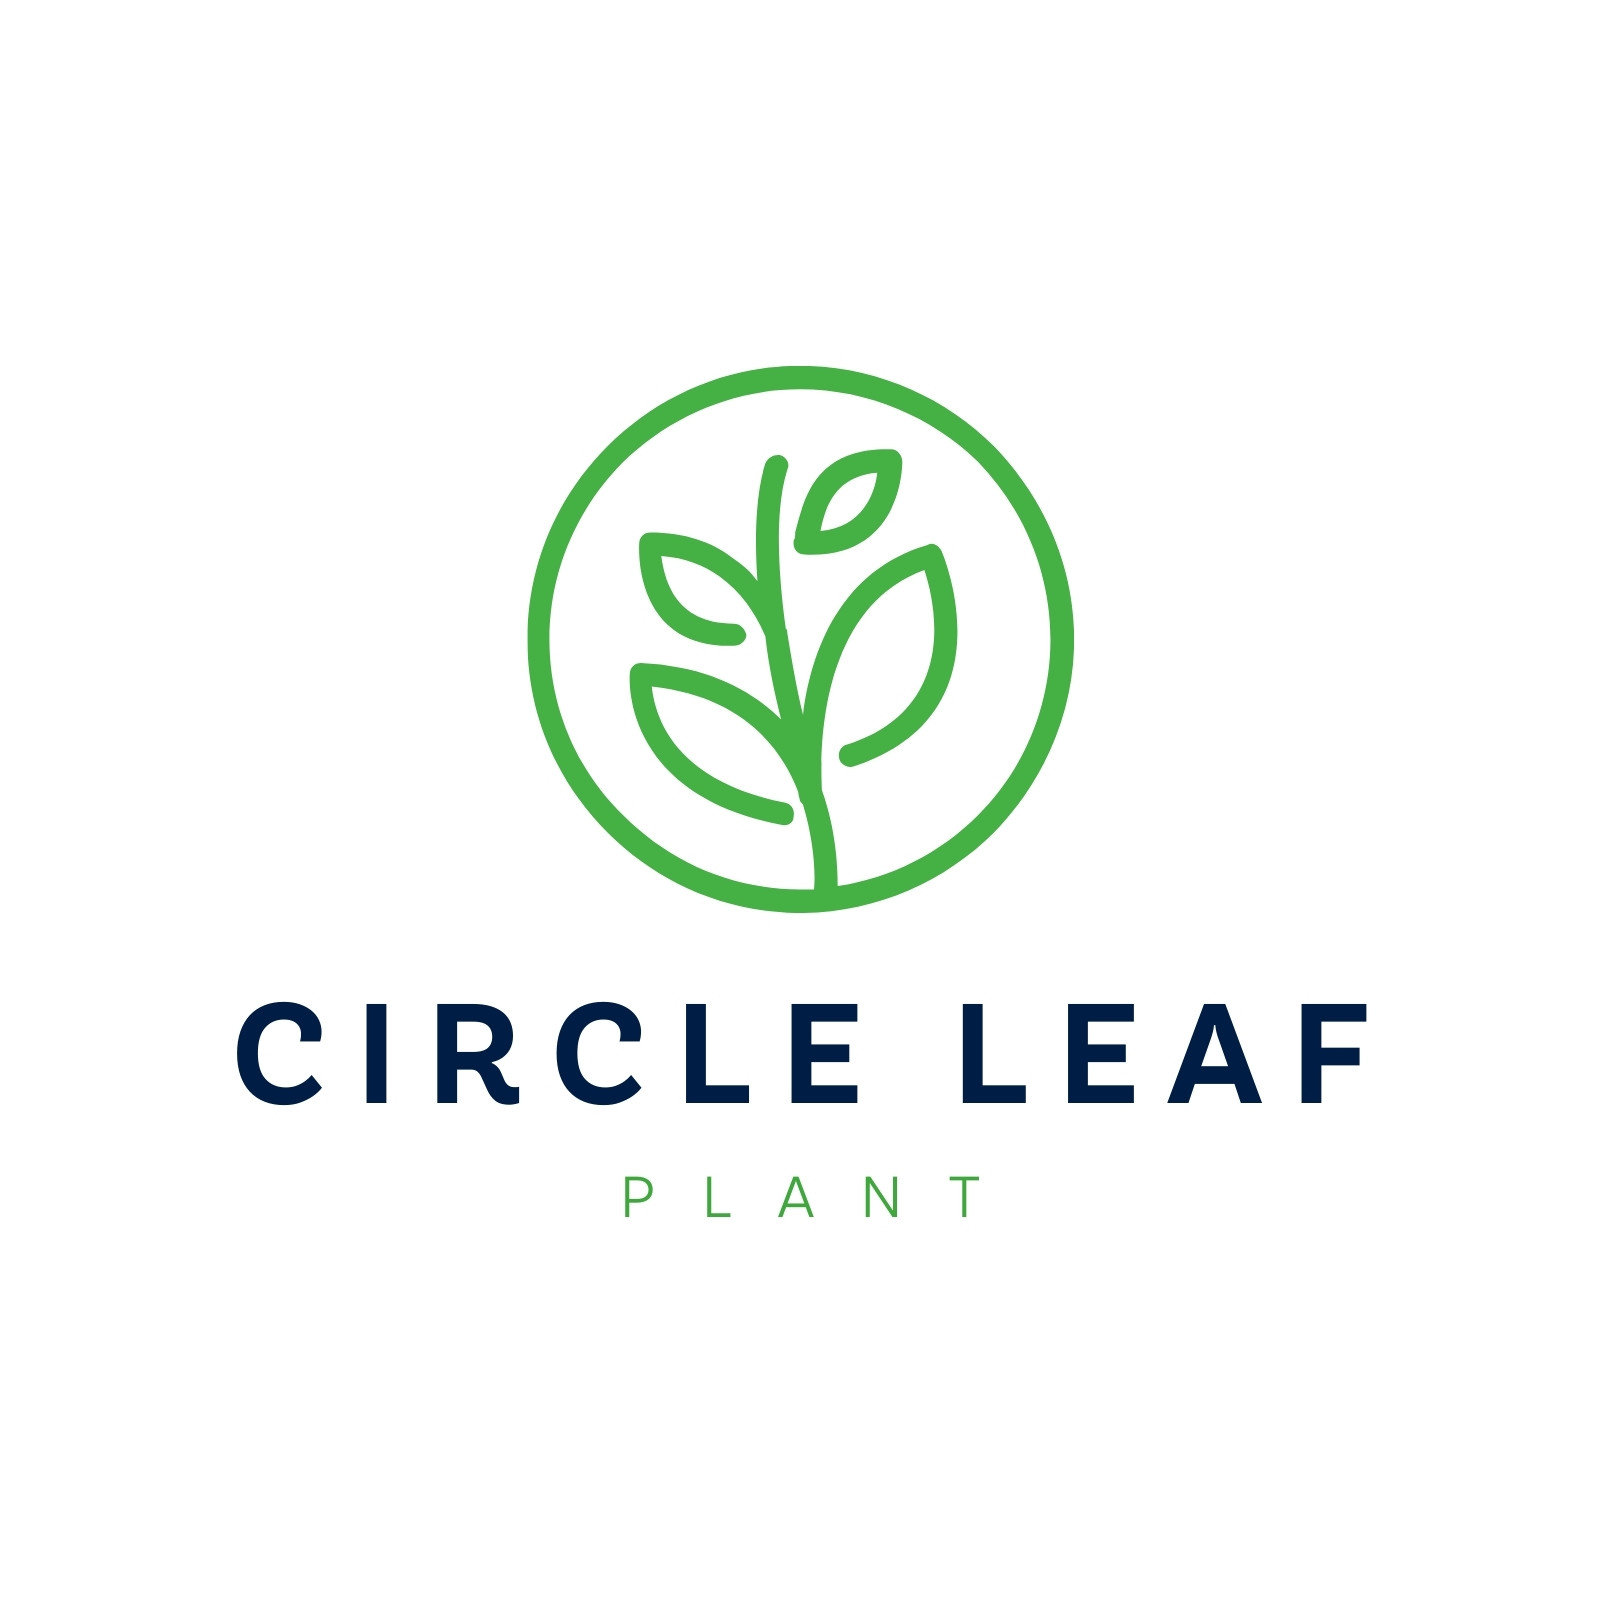 Free: Leaf circle logo template vector image - nohat.cc